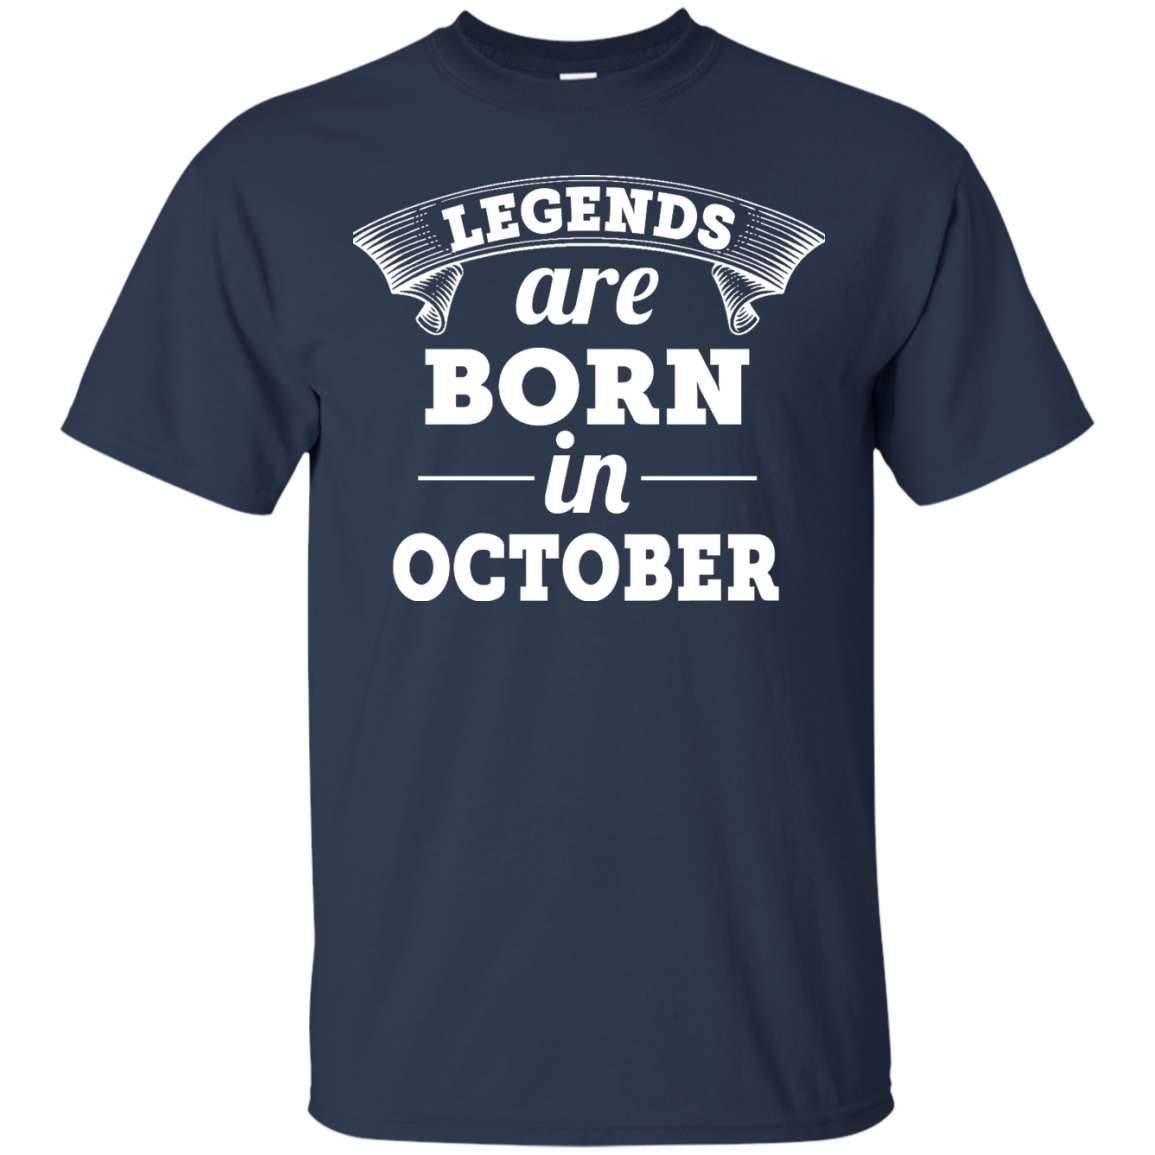 Legends are born in October shirt, hoodie, tank